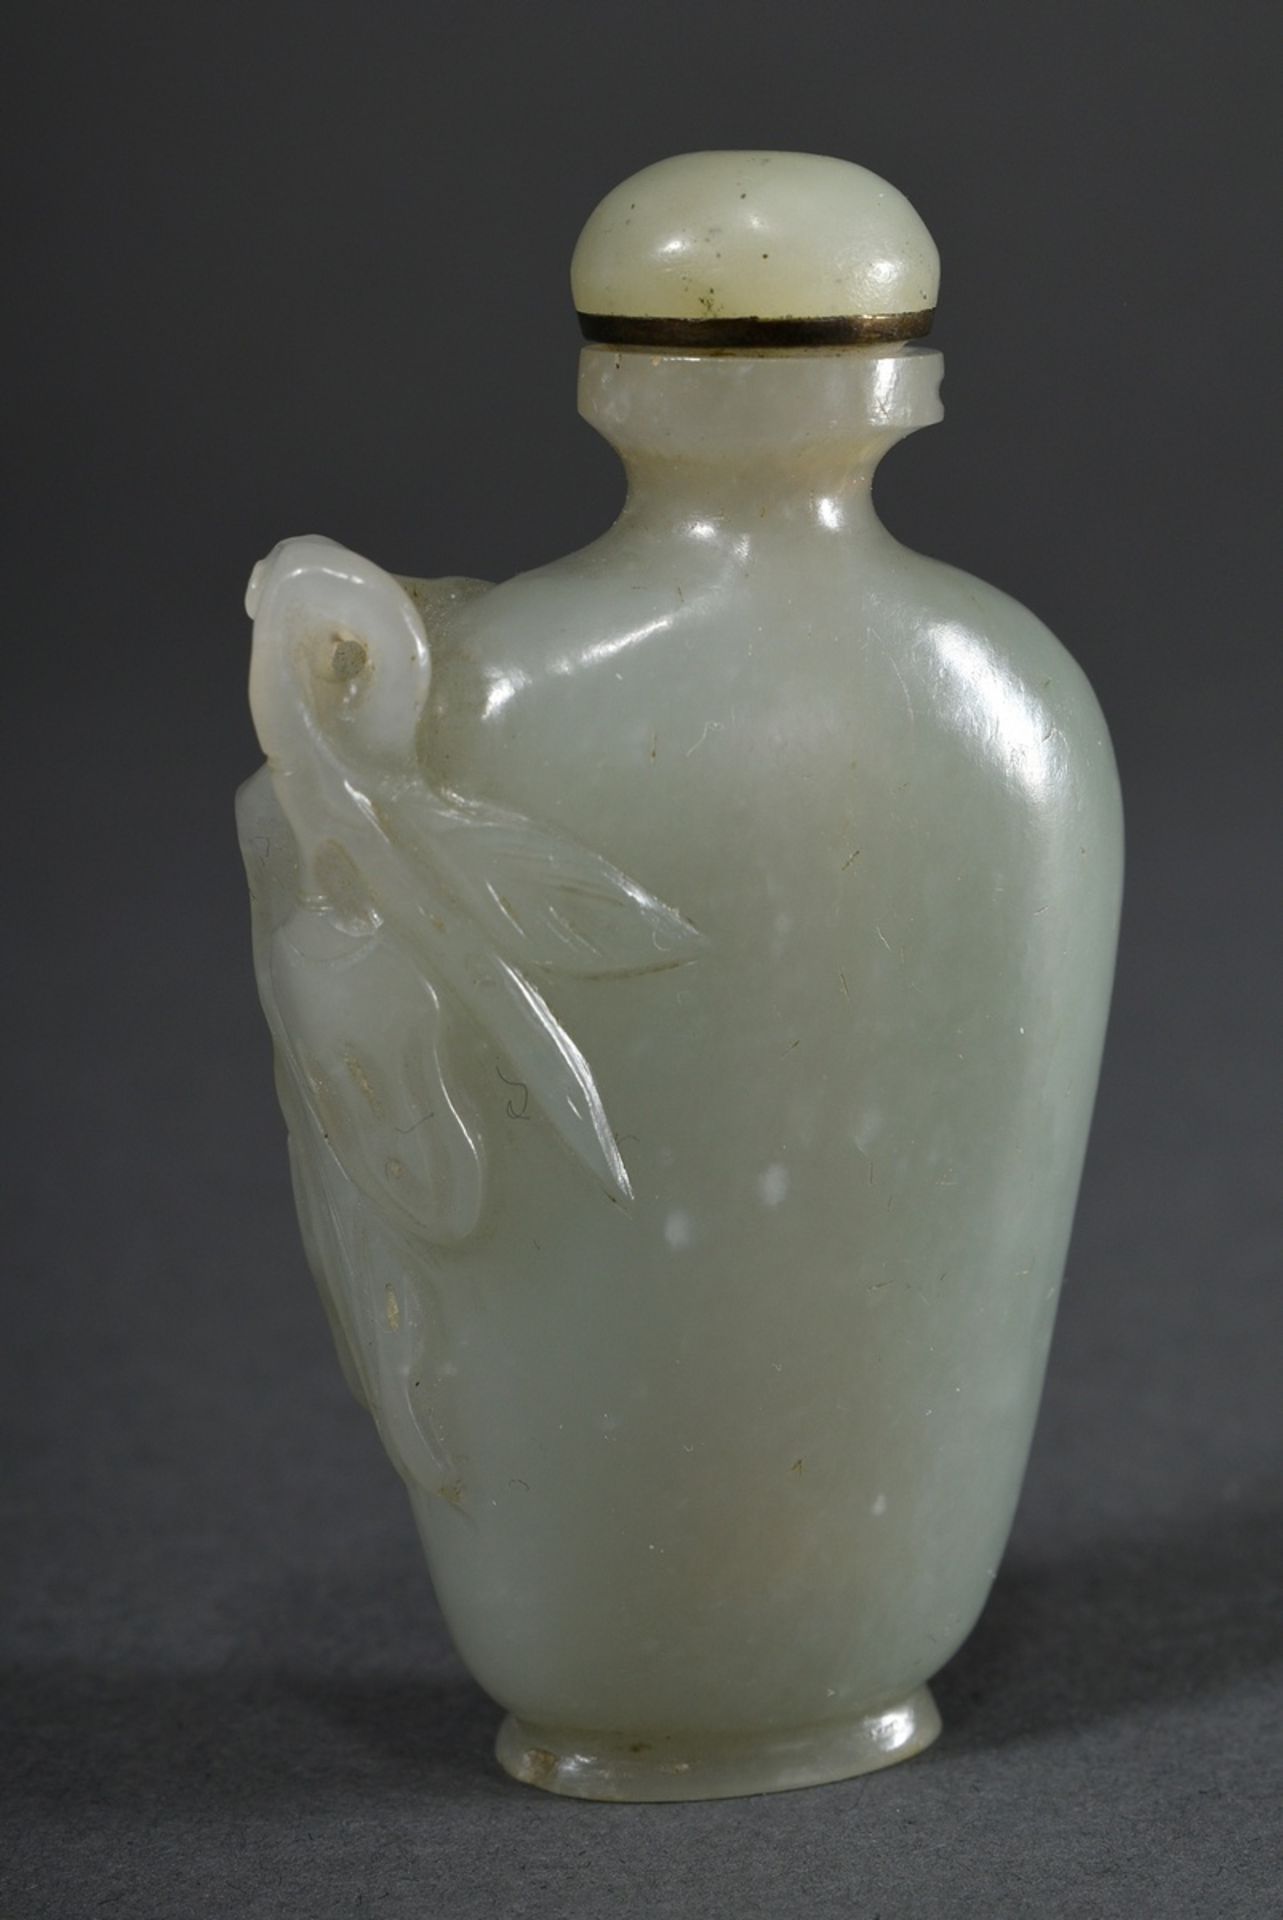 Seladon jade snuffbottle with "flower and leaf decoration" in high relief, China probably Qing dyna